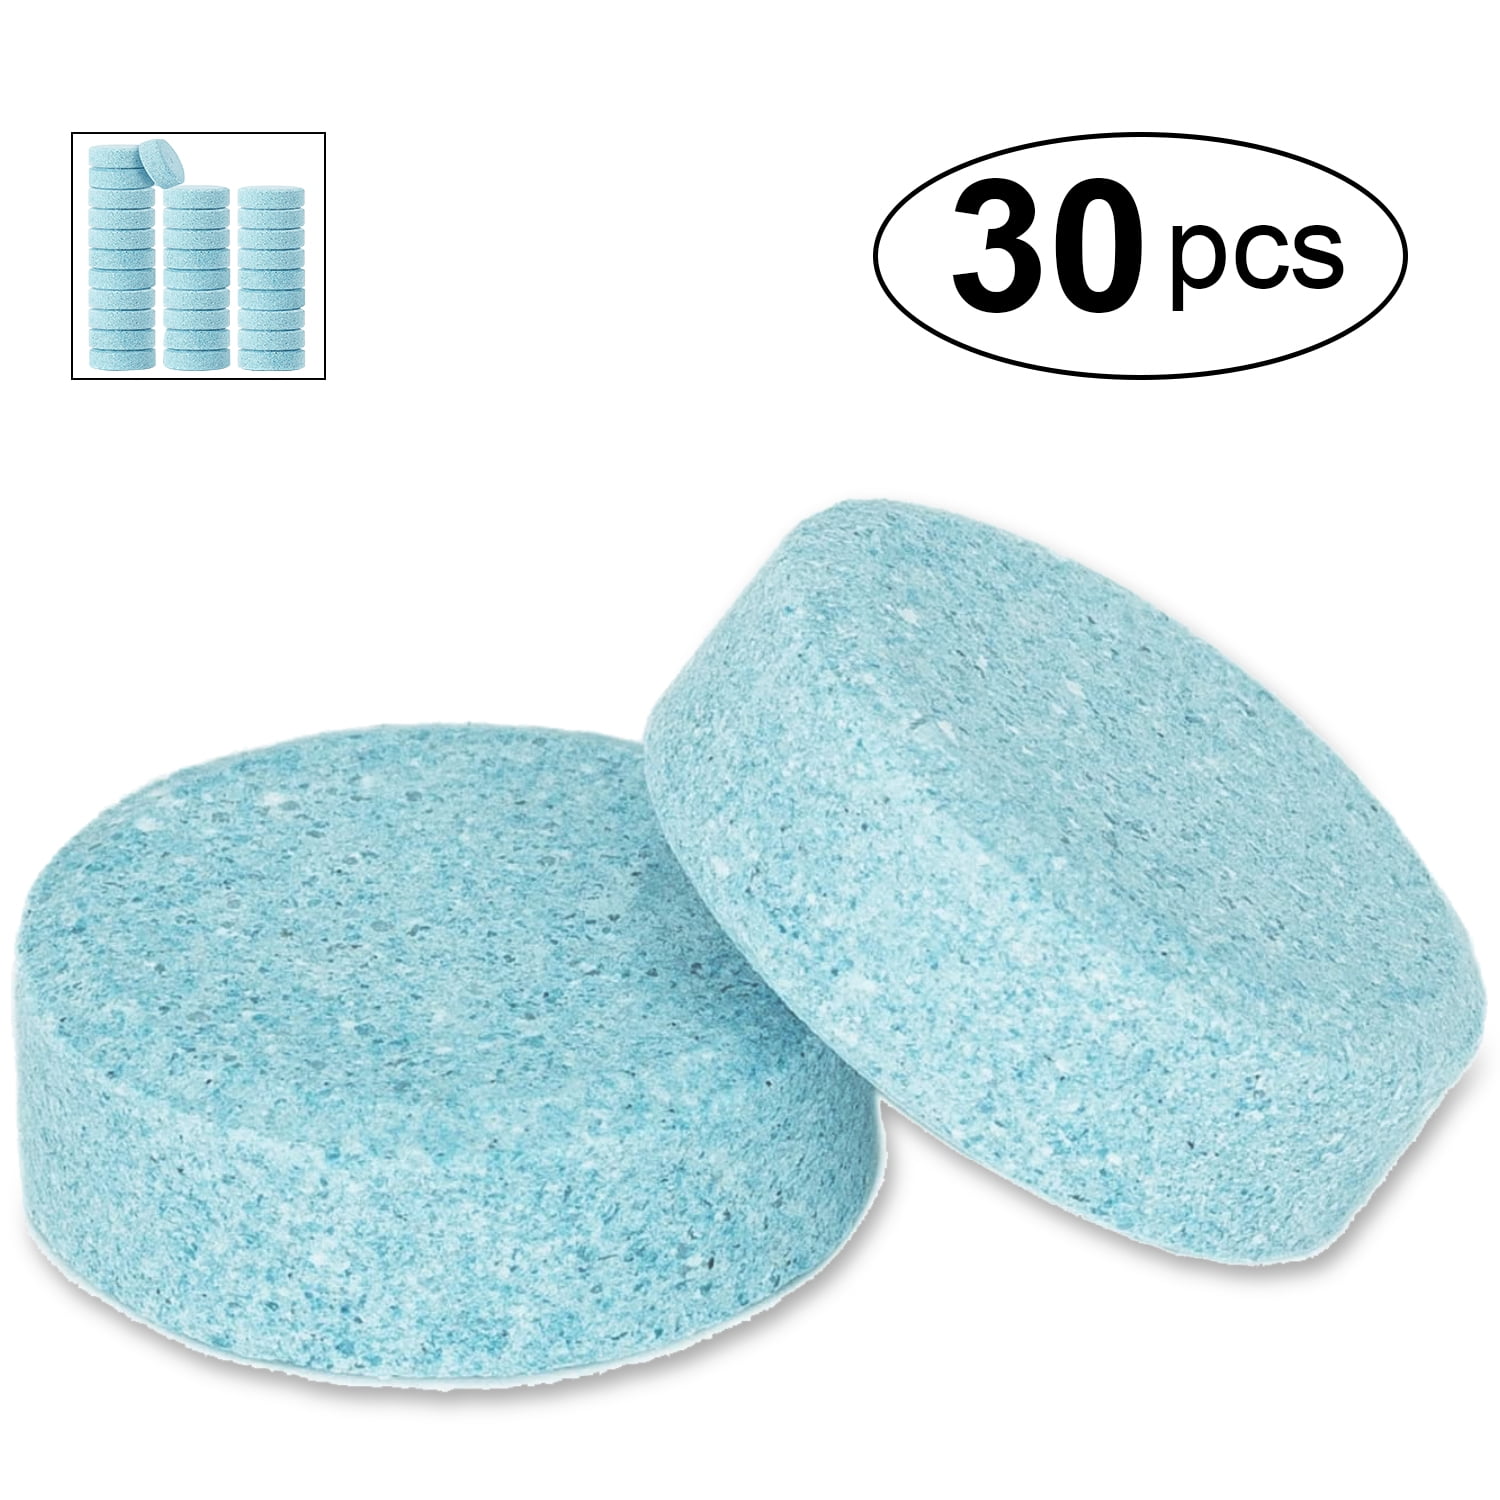 Somnr 60 Pcs Car Windshield Glass Concentrated Clean Washer Tablets, Multifunctional Effervescent Spray Cleaner Cleaning Tool, Window Cleaner, Size: 9 x 6.3